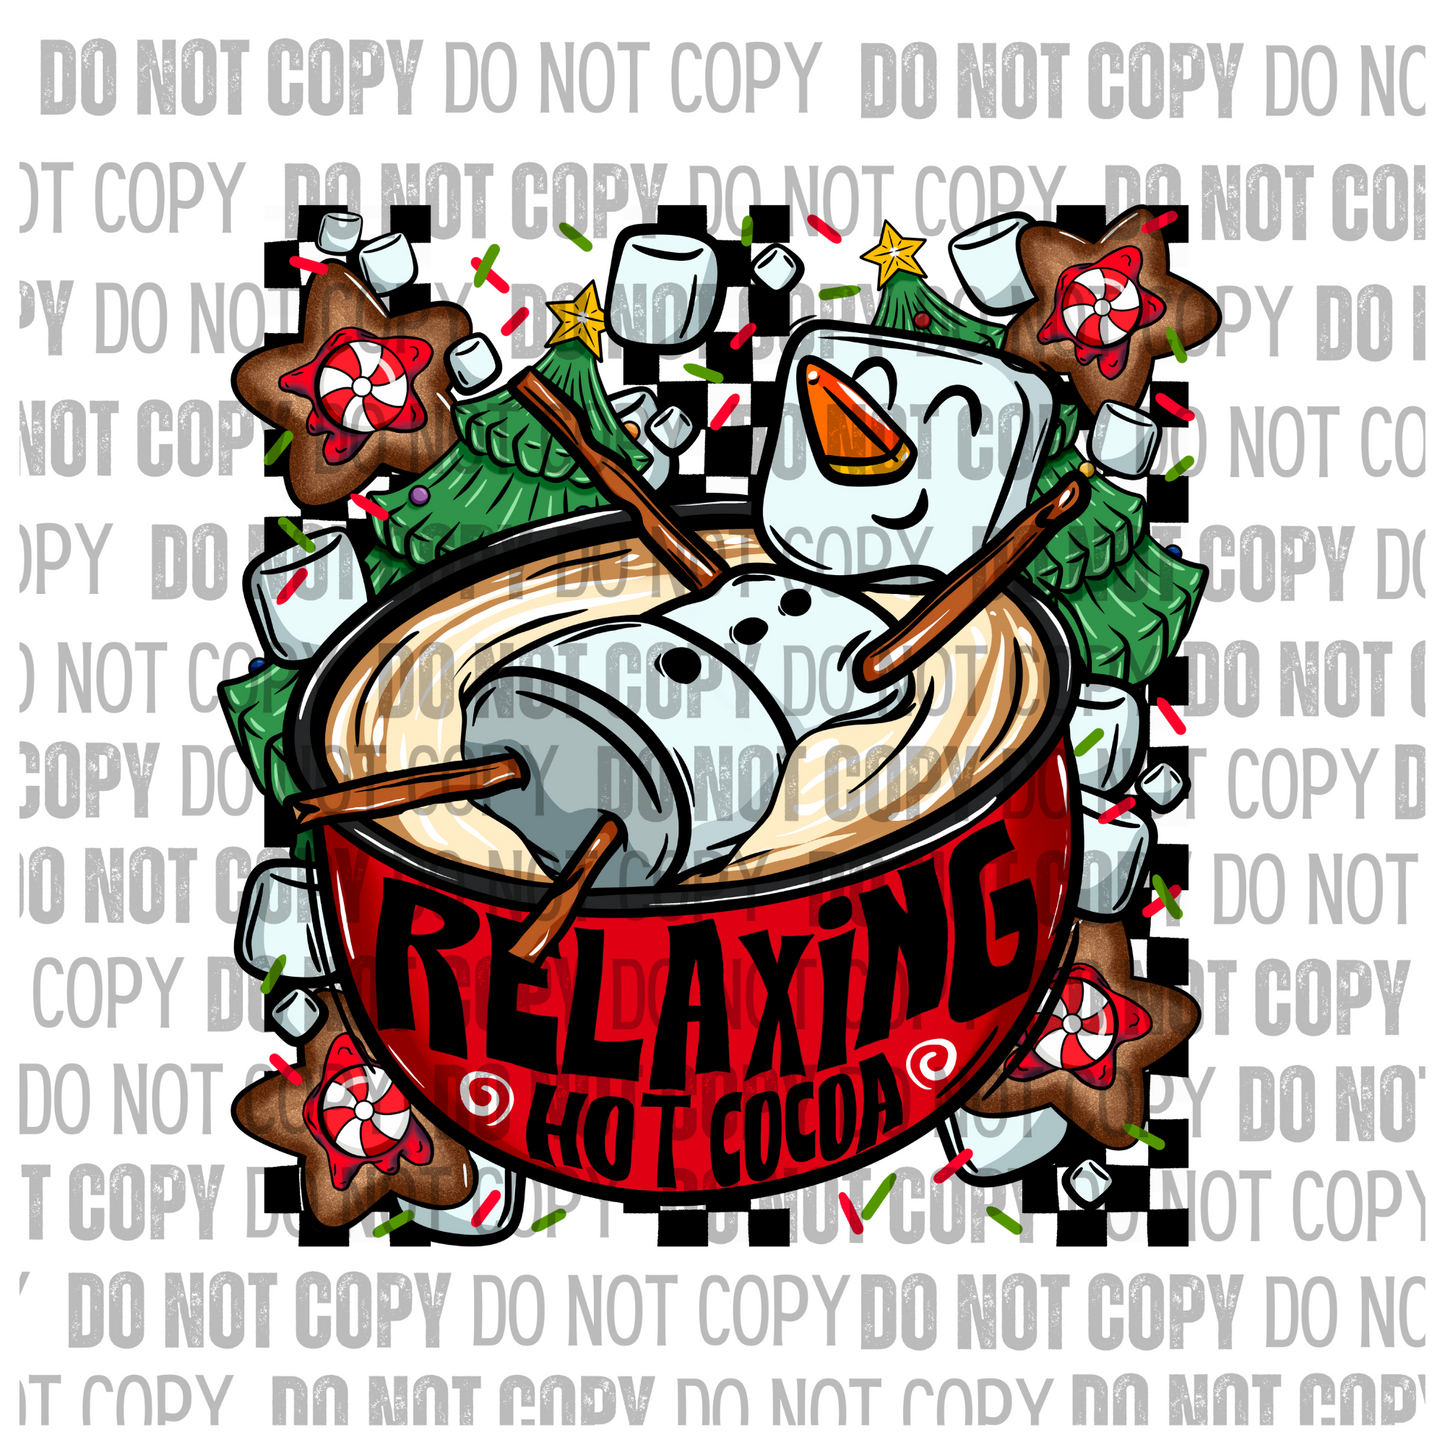 Relaxing Hot Cocoa - Decal